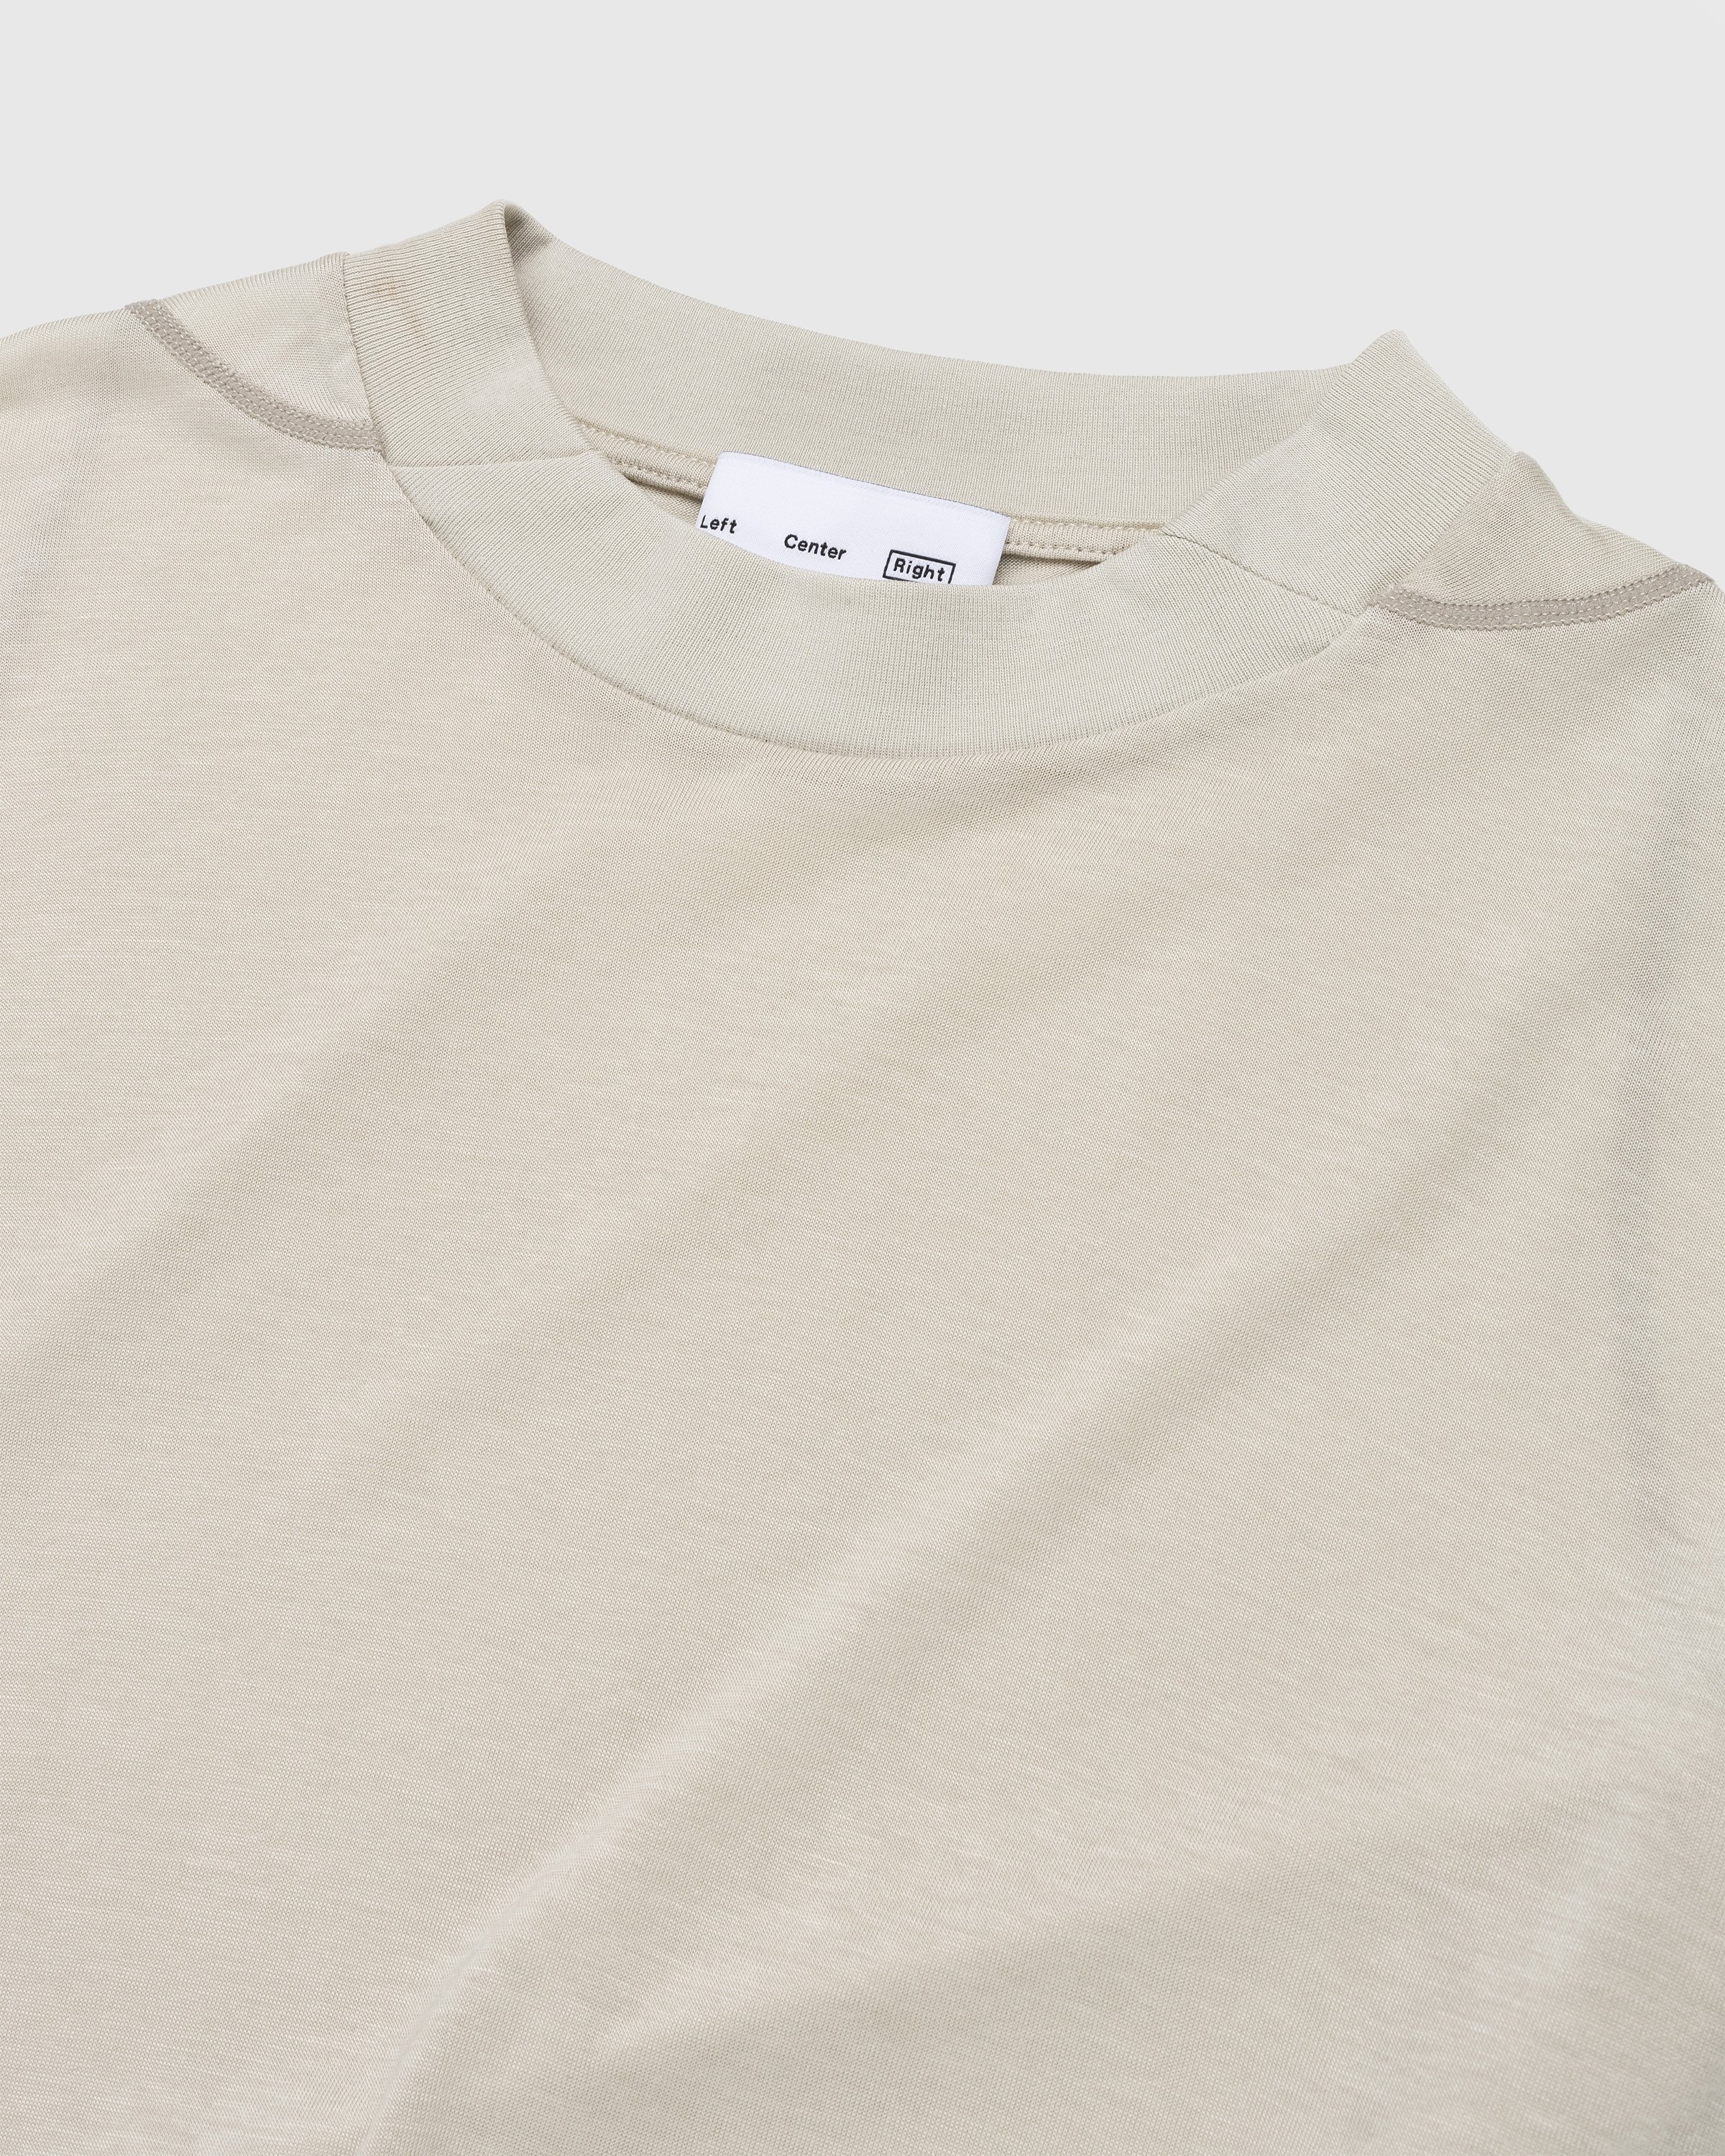 Post Archive Faction (PAF) - 5.0+ Longsleeve Right Oat - Clothing - Beige - Image 5